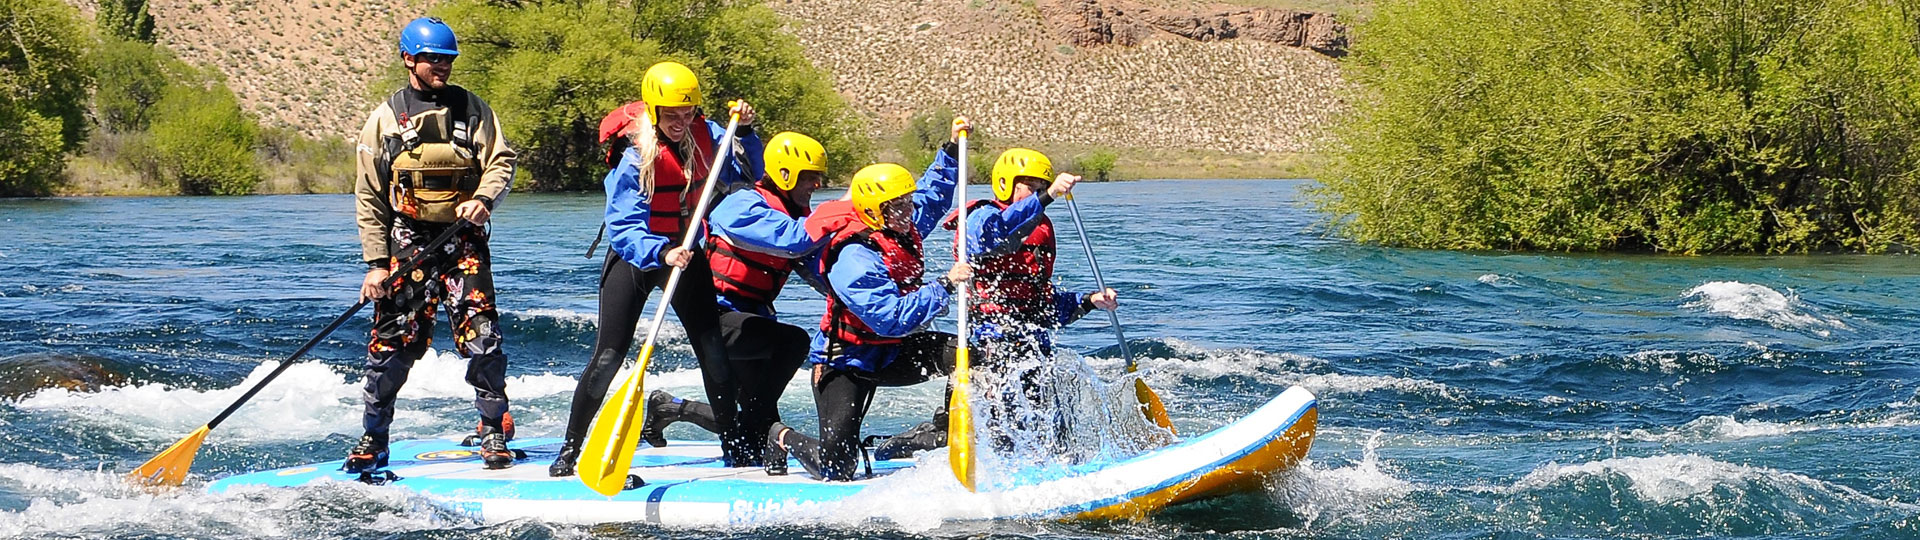 Extremo Sur - Stand Up Rafting